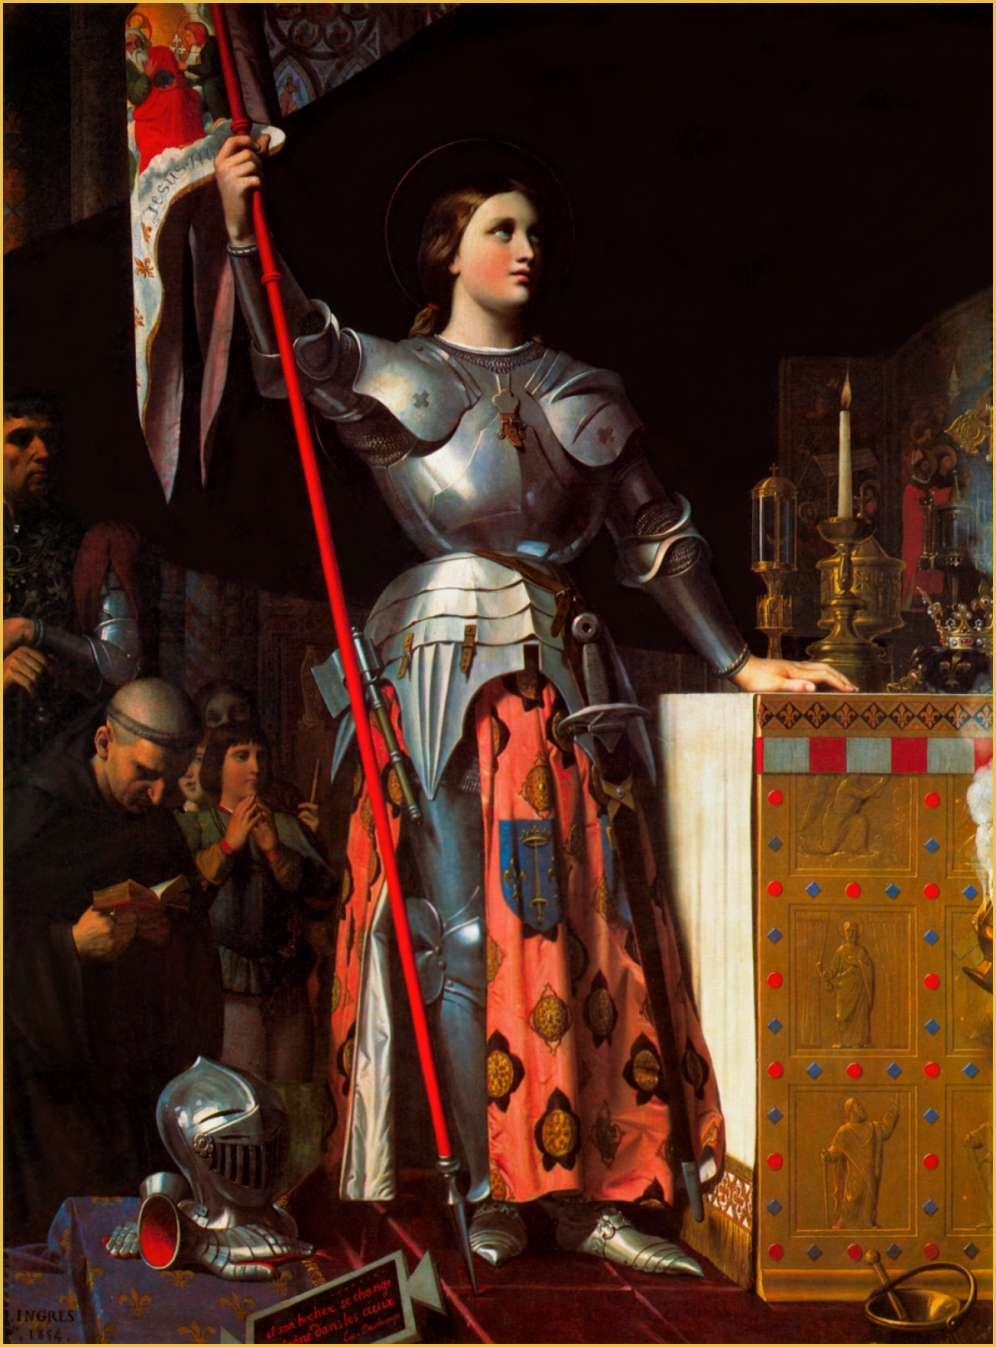 ST. JOAN BY INGRES